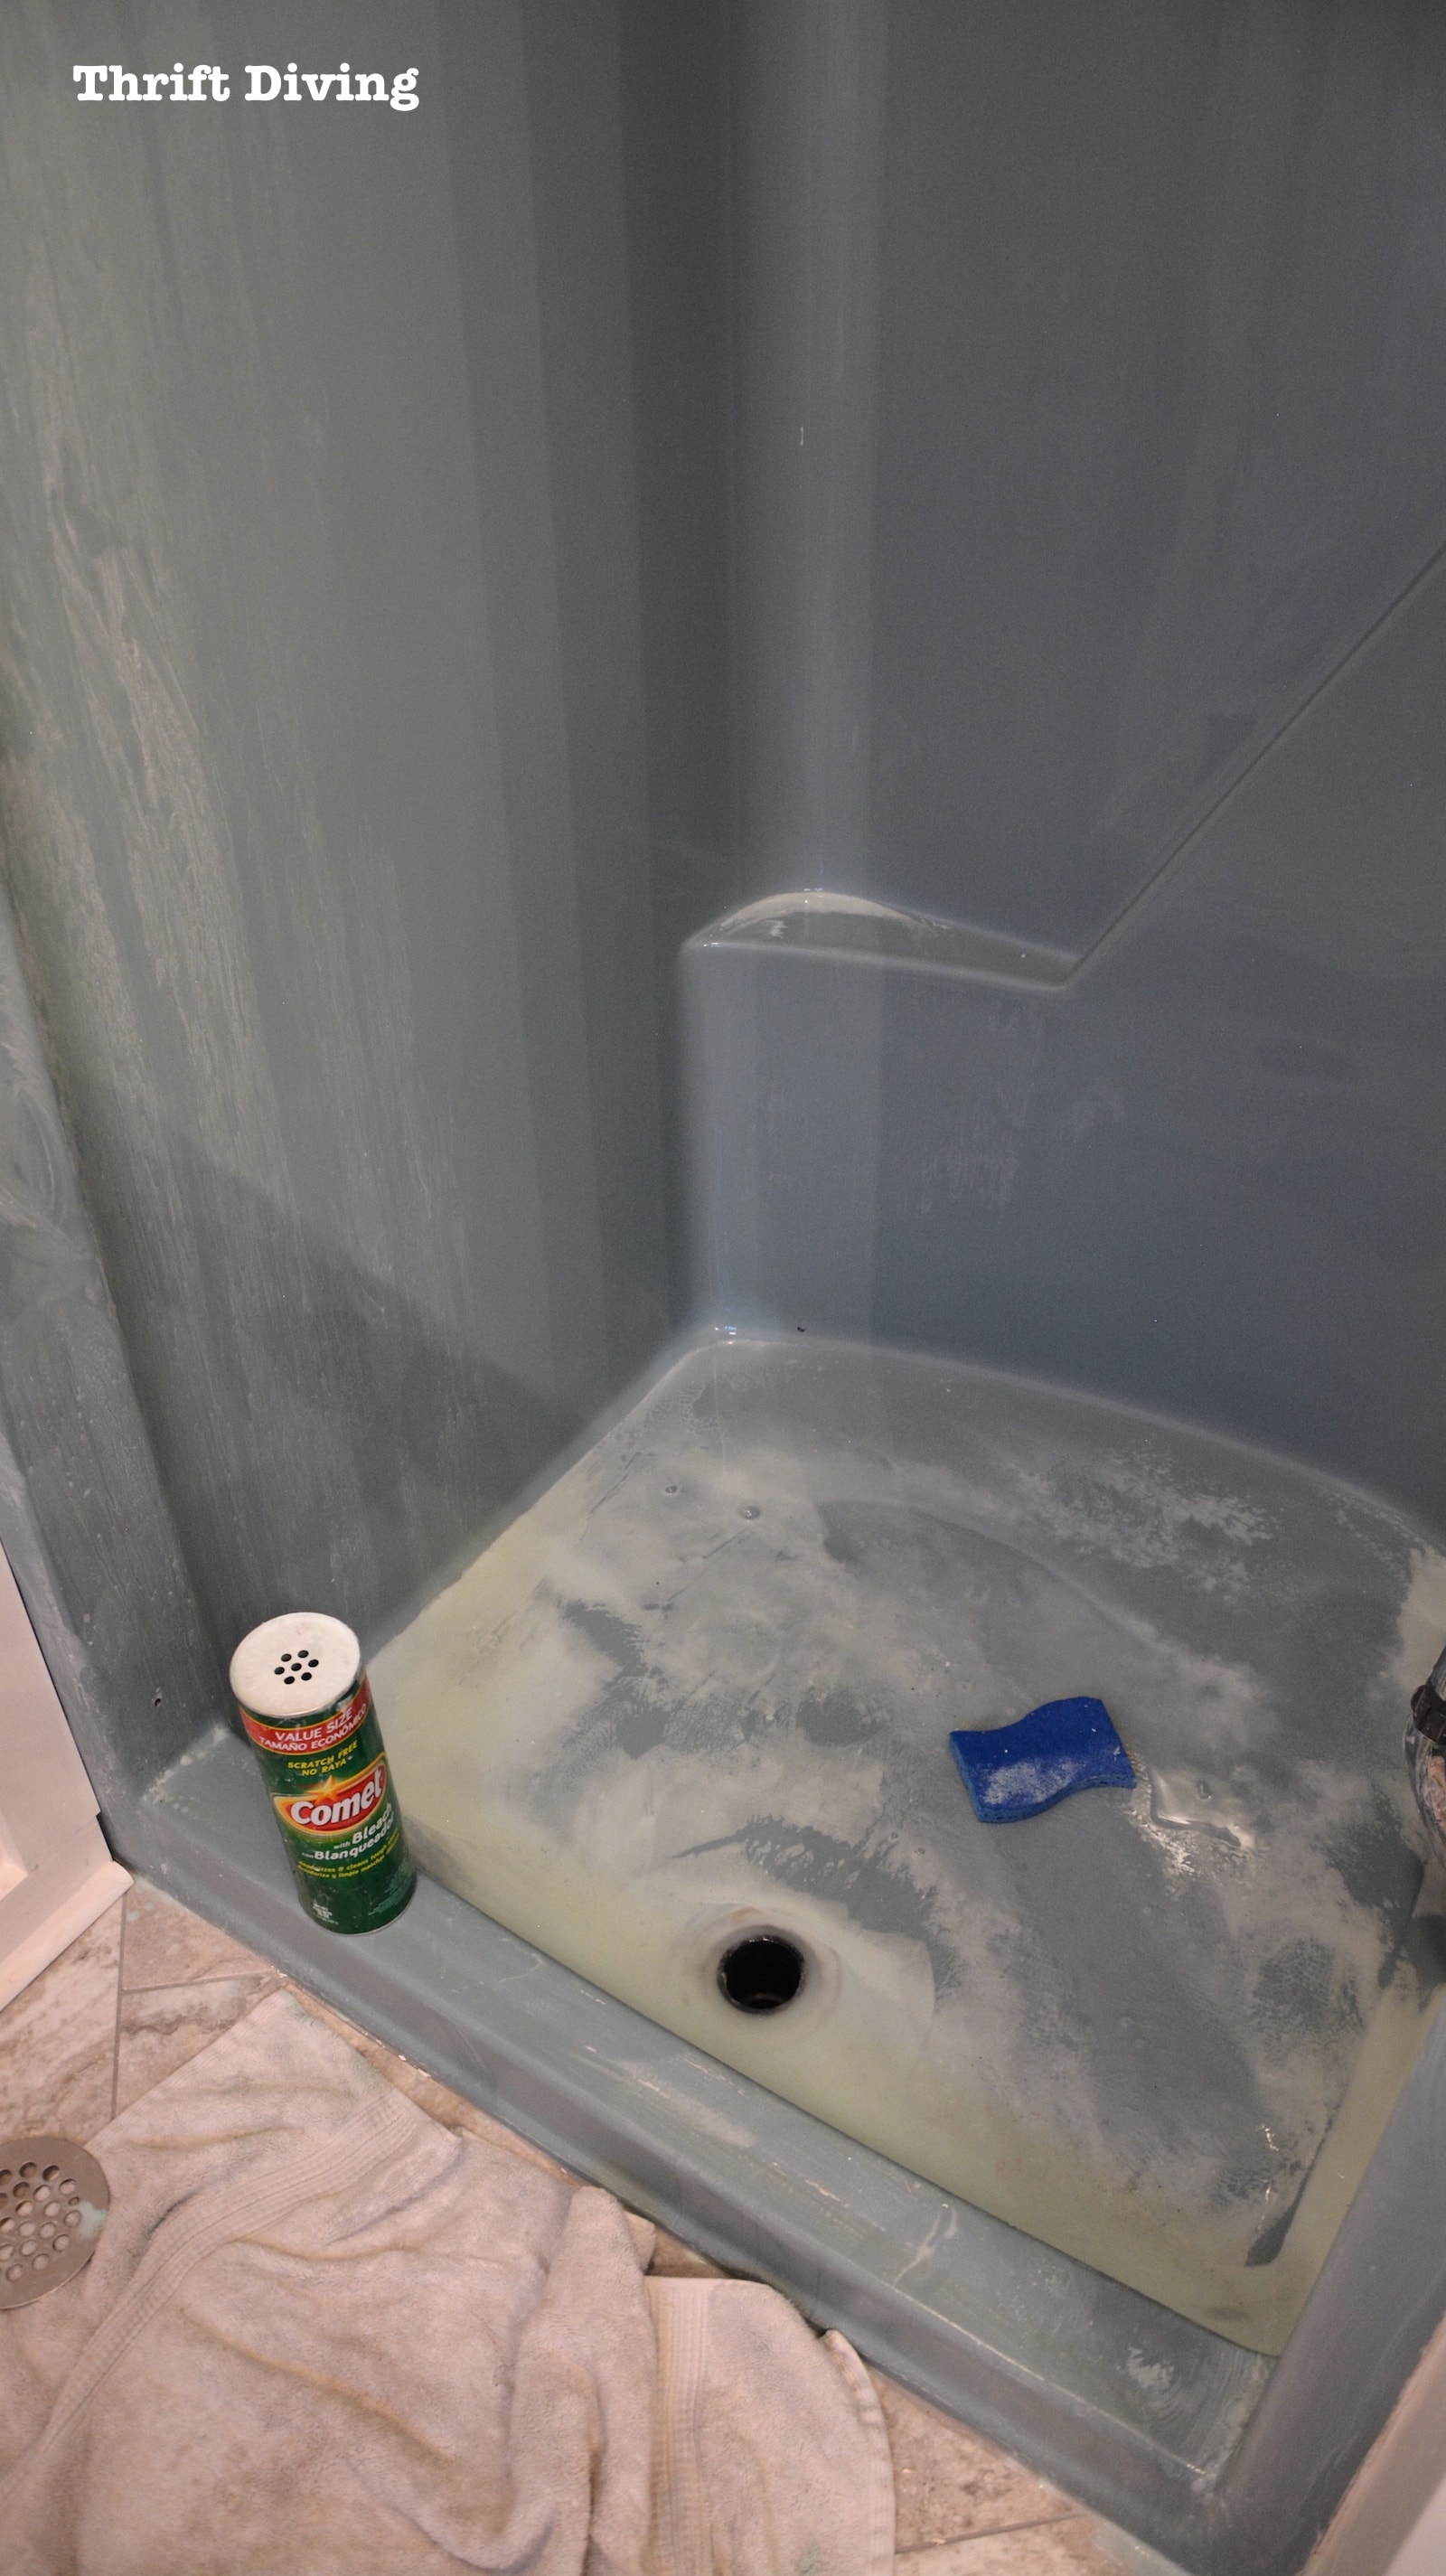 Shower-and-tub-refinishing-how-to-paint-a-shower-tub - Thrift Diving Blog - 8808